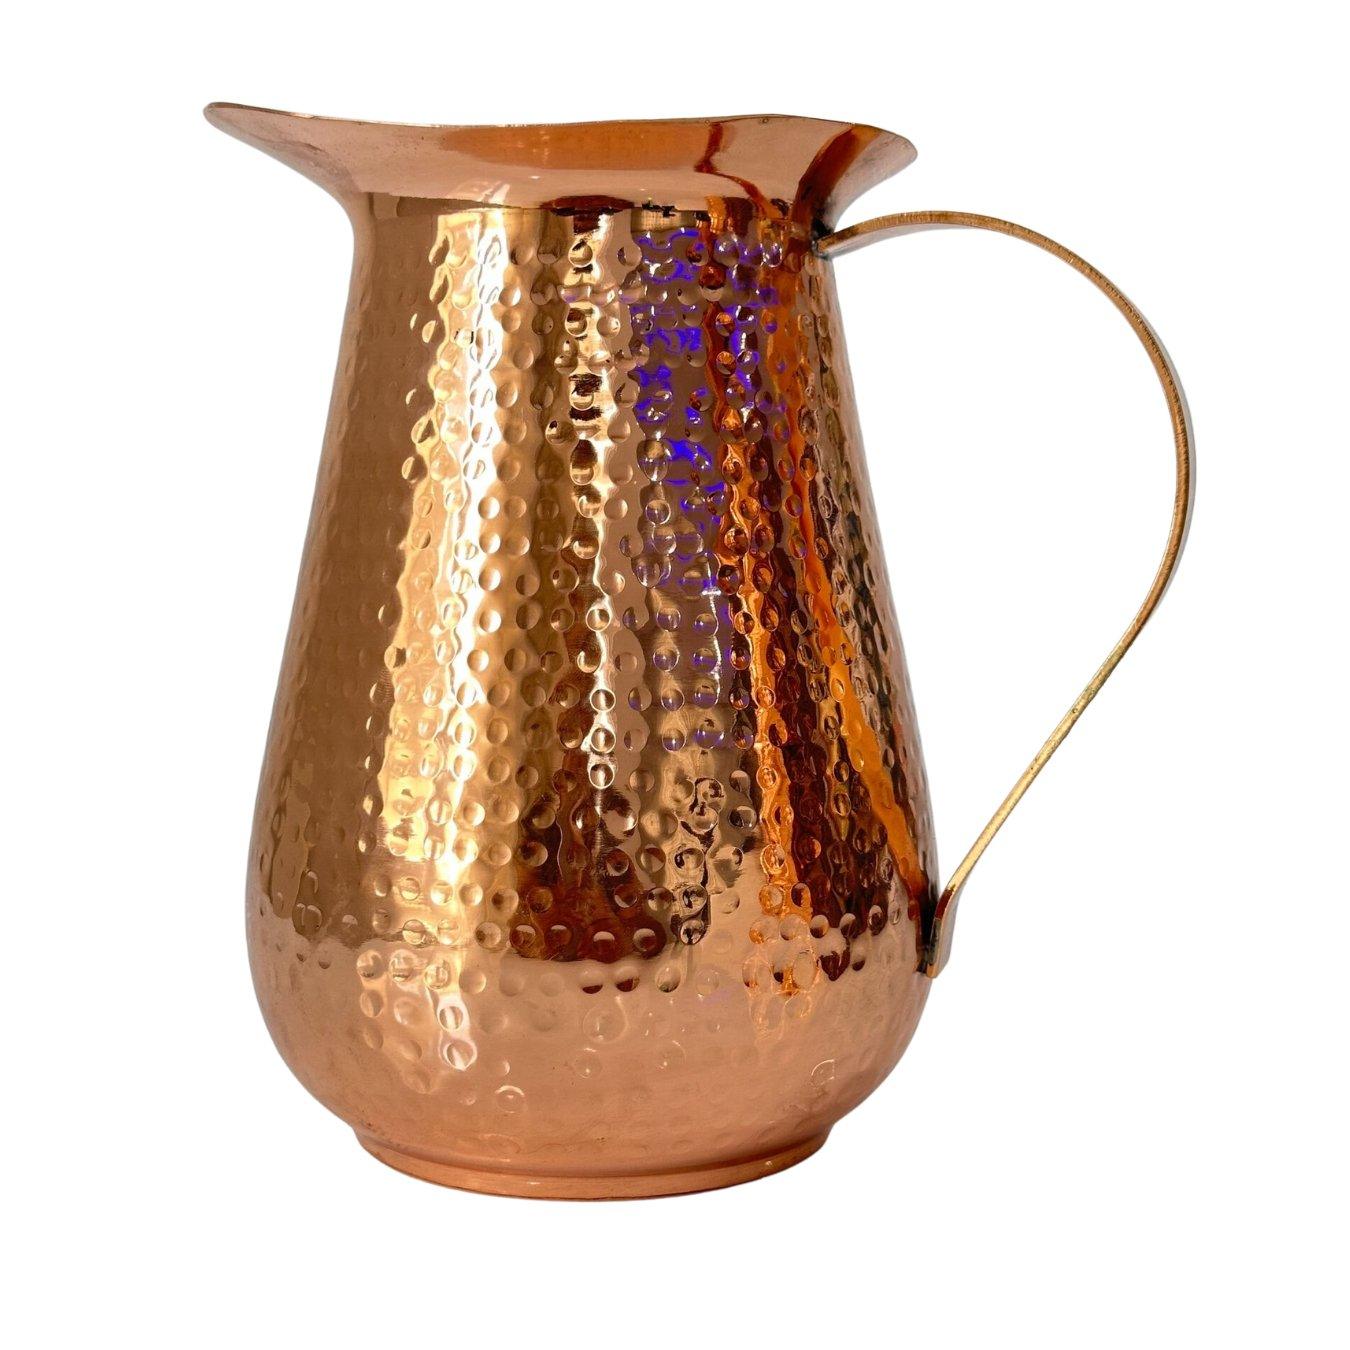 copper pitcher pounded design 